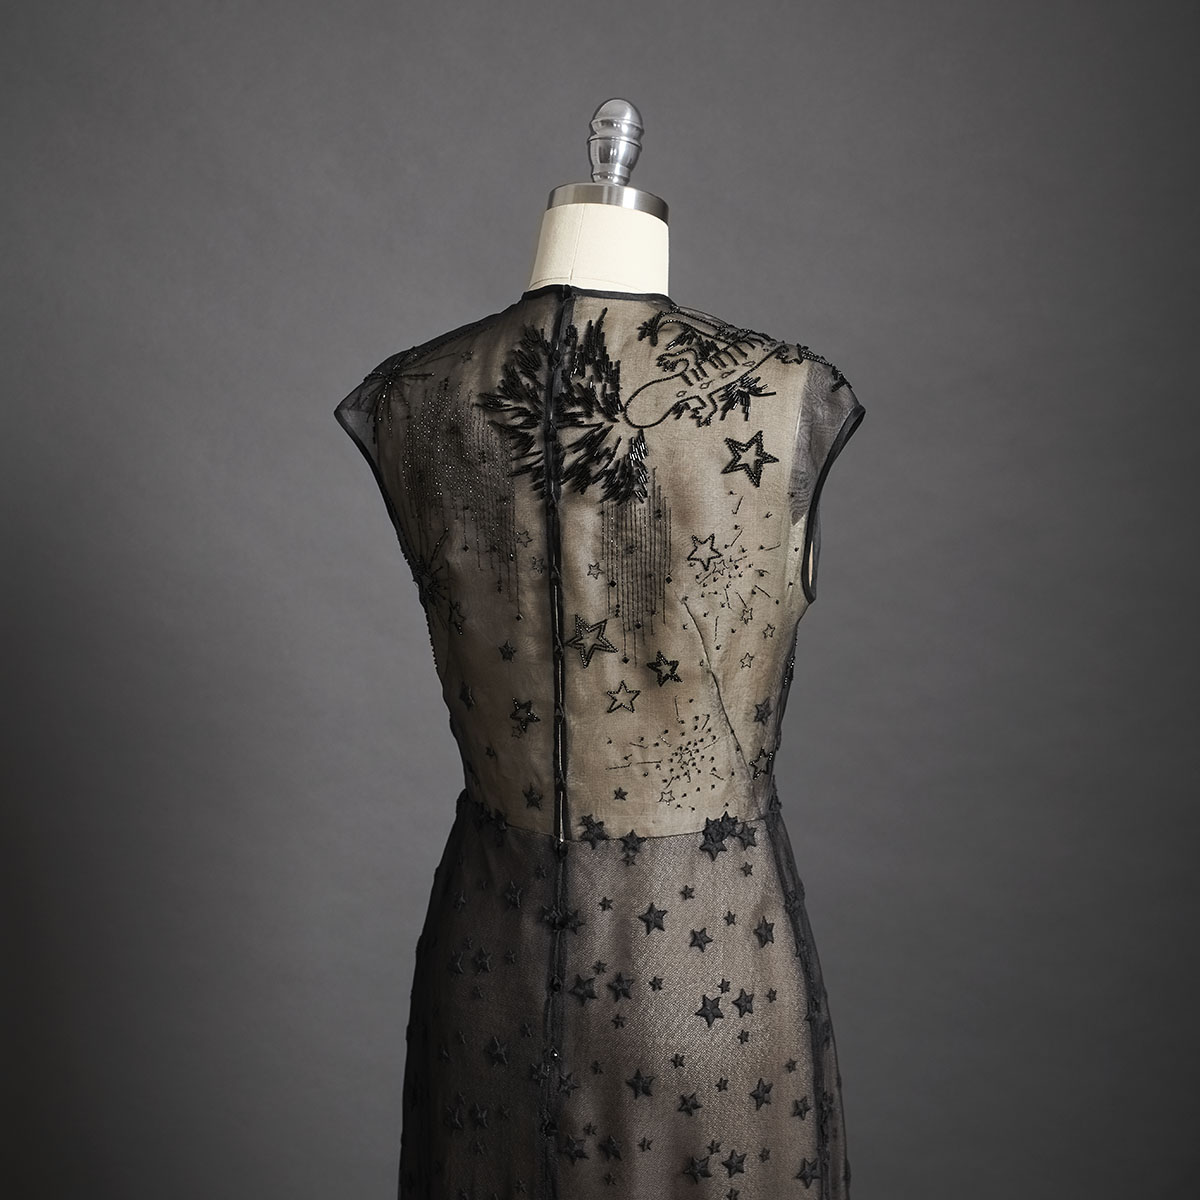 A black A-line gown featuring hand-embroidered stars out of metallic thread and adorned with Swarovski crystals on soft tulle. - DELPHINE GENIN